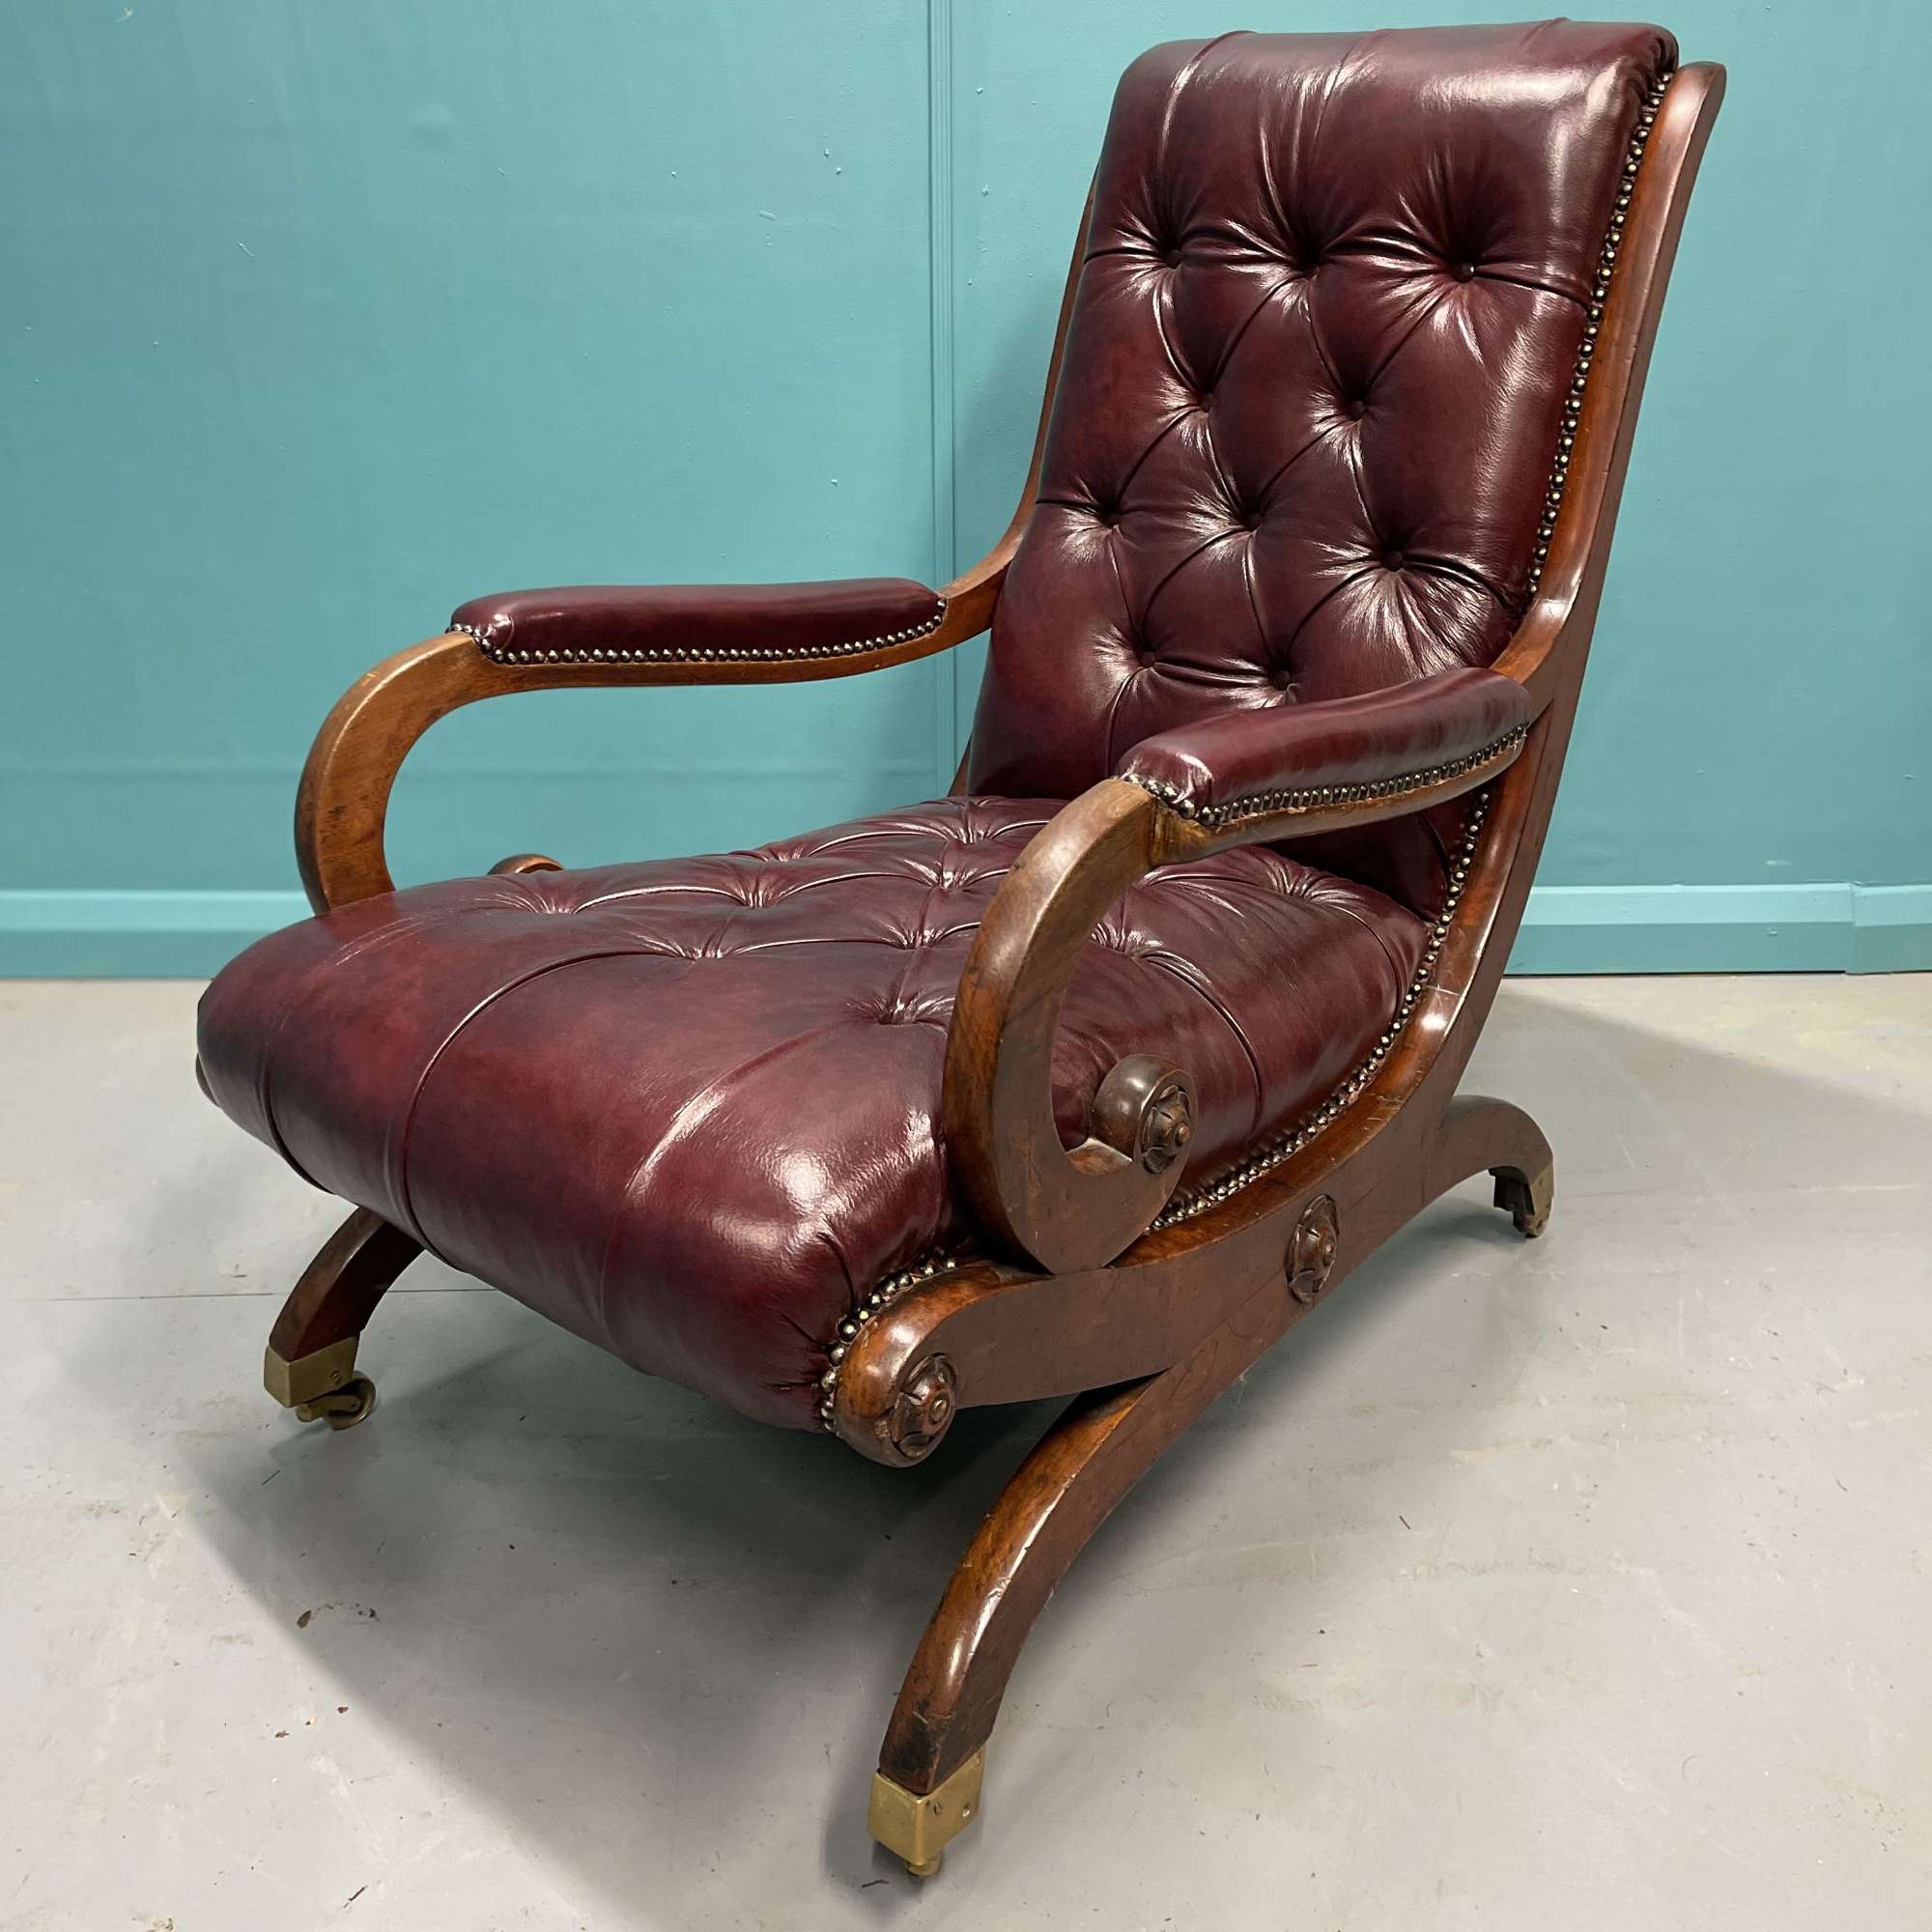 Gillows “Spanish” buttoned leather armchair